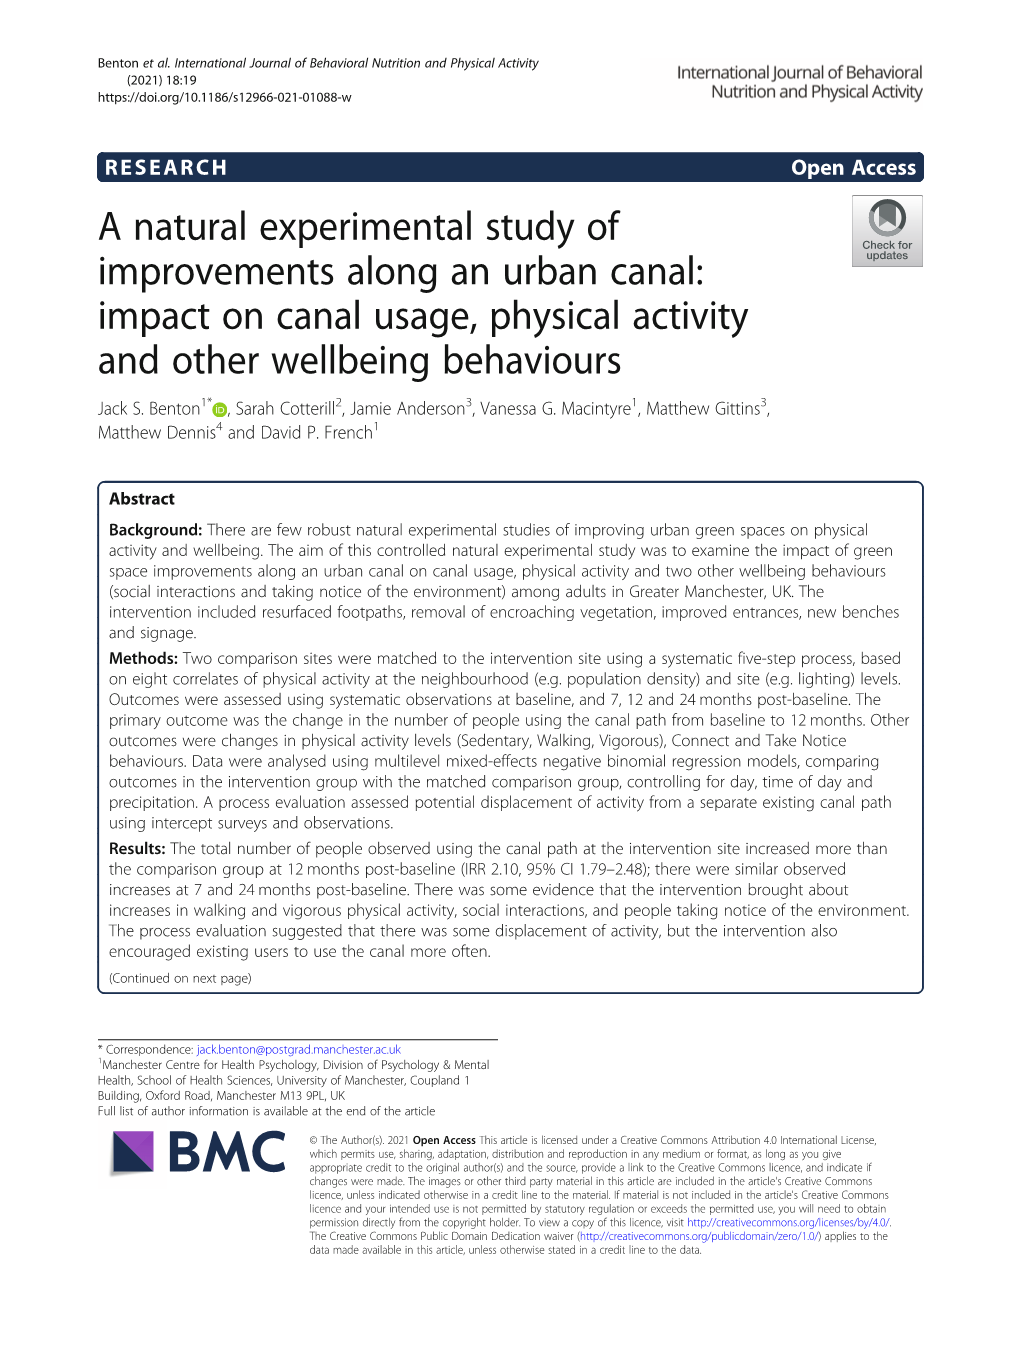 A Natural Experimental Study of Improvements Along an Urban Canal: Impact on Canal Usage, Physical Activity and Other Wellbeing Behaviours Jack S